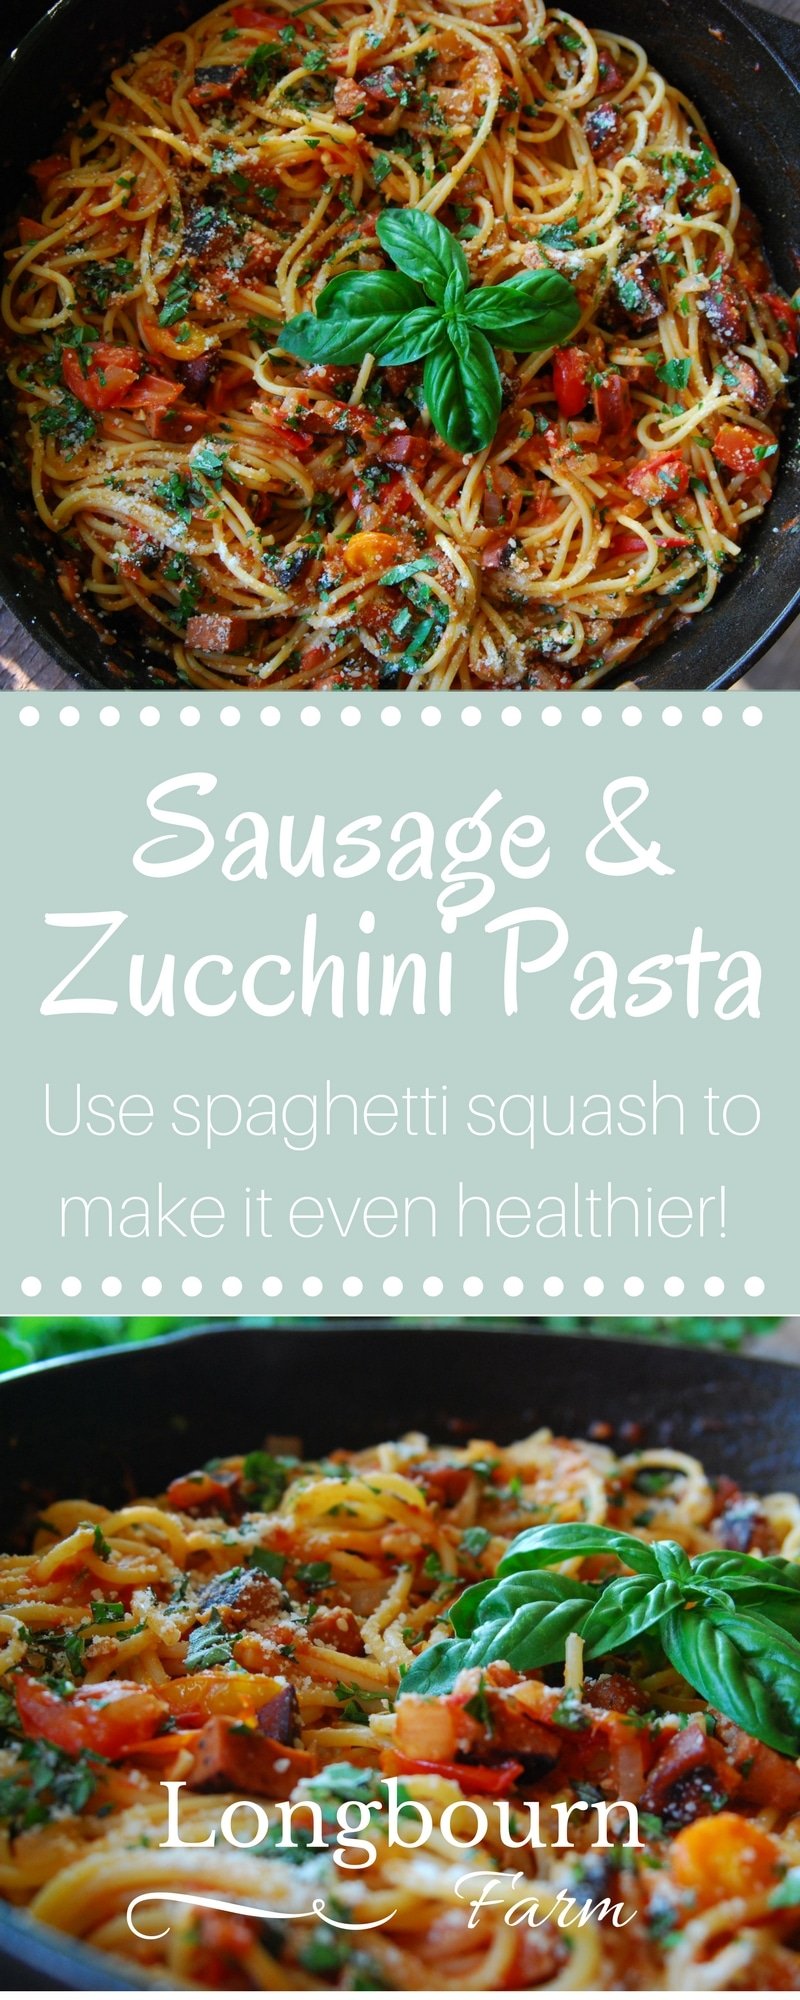 Zucchini and Sausage Spaghetti is a quick dish that is packed full of fresh flavor. Substitute the pasta for spaghetti squash to make it even healthier!